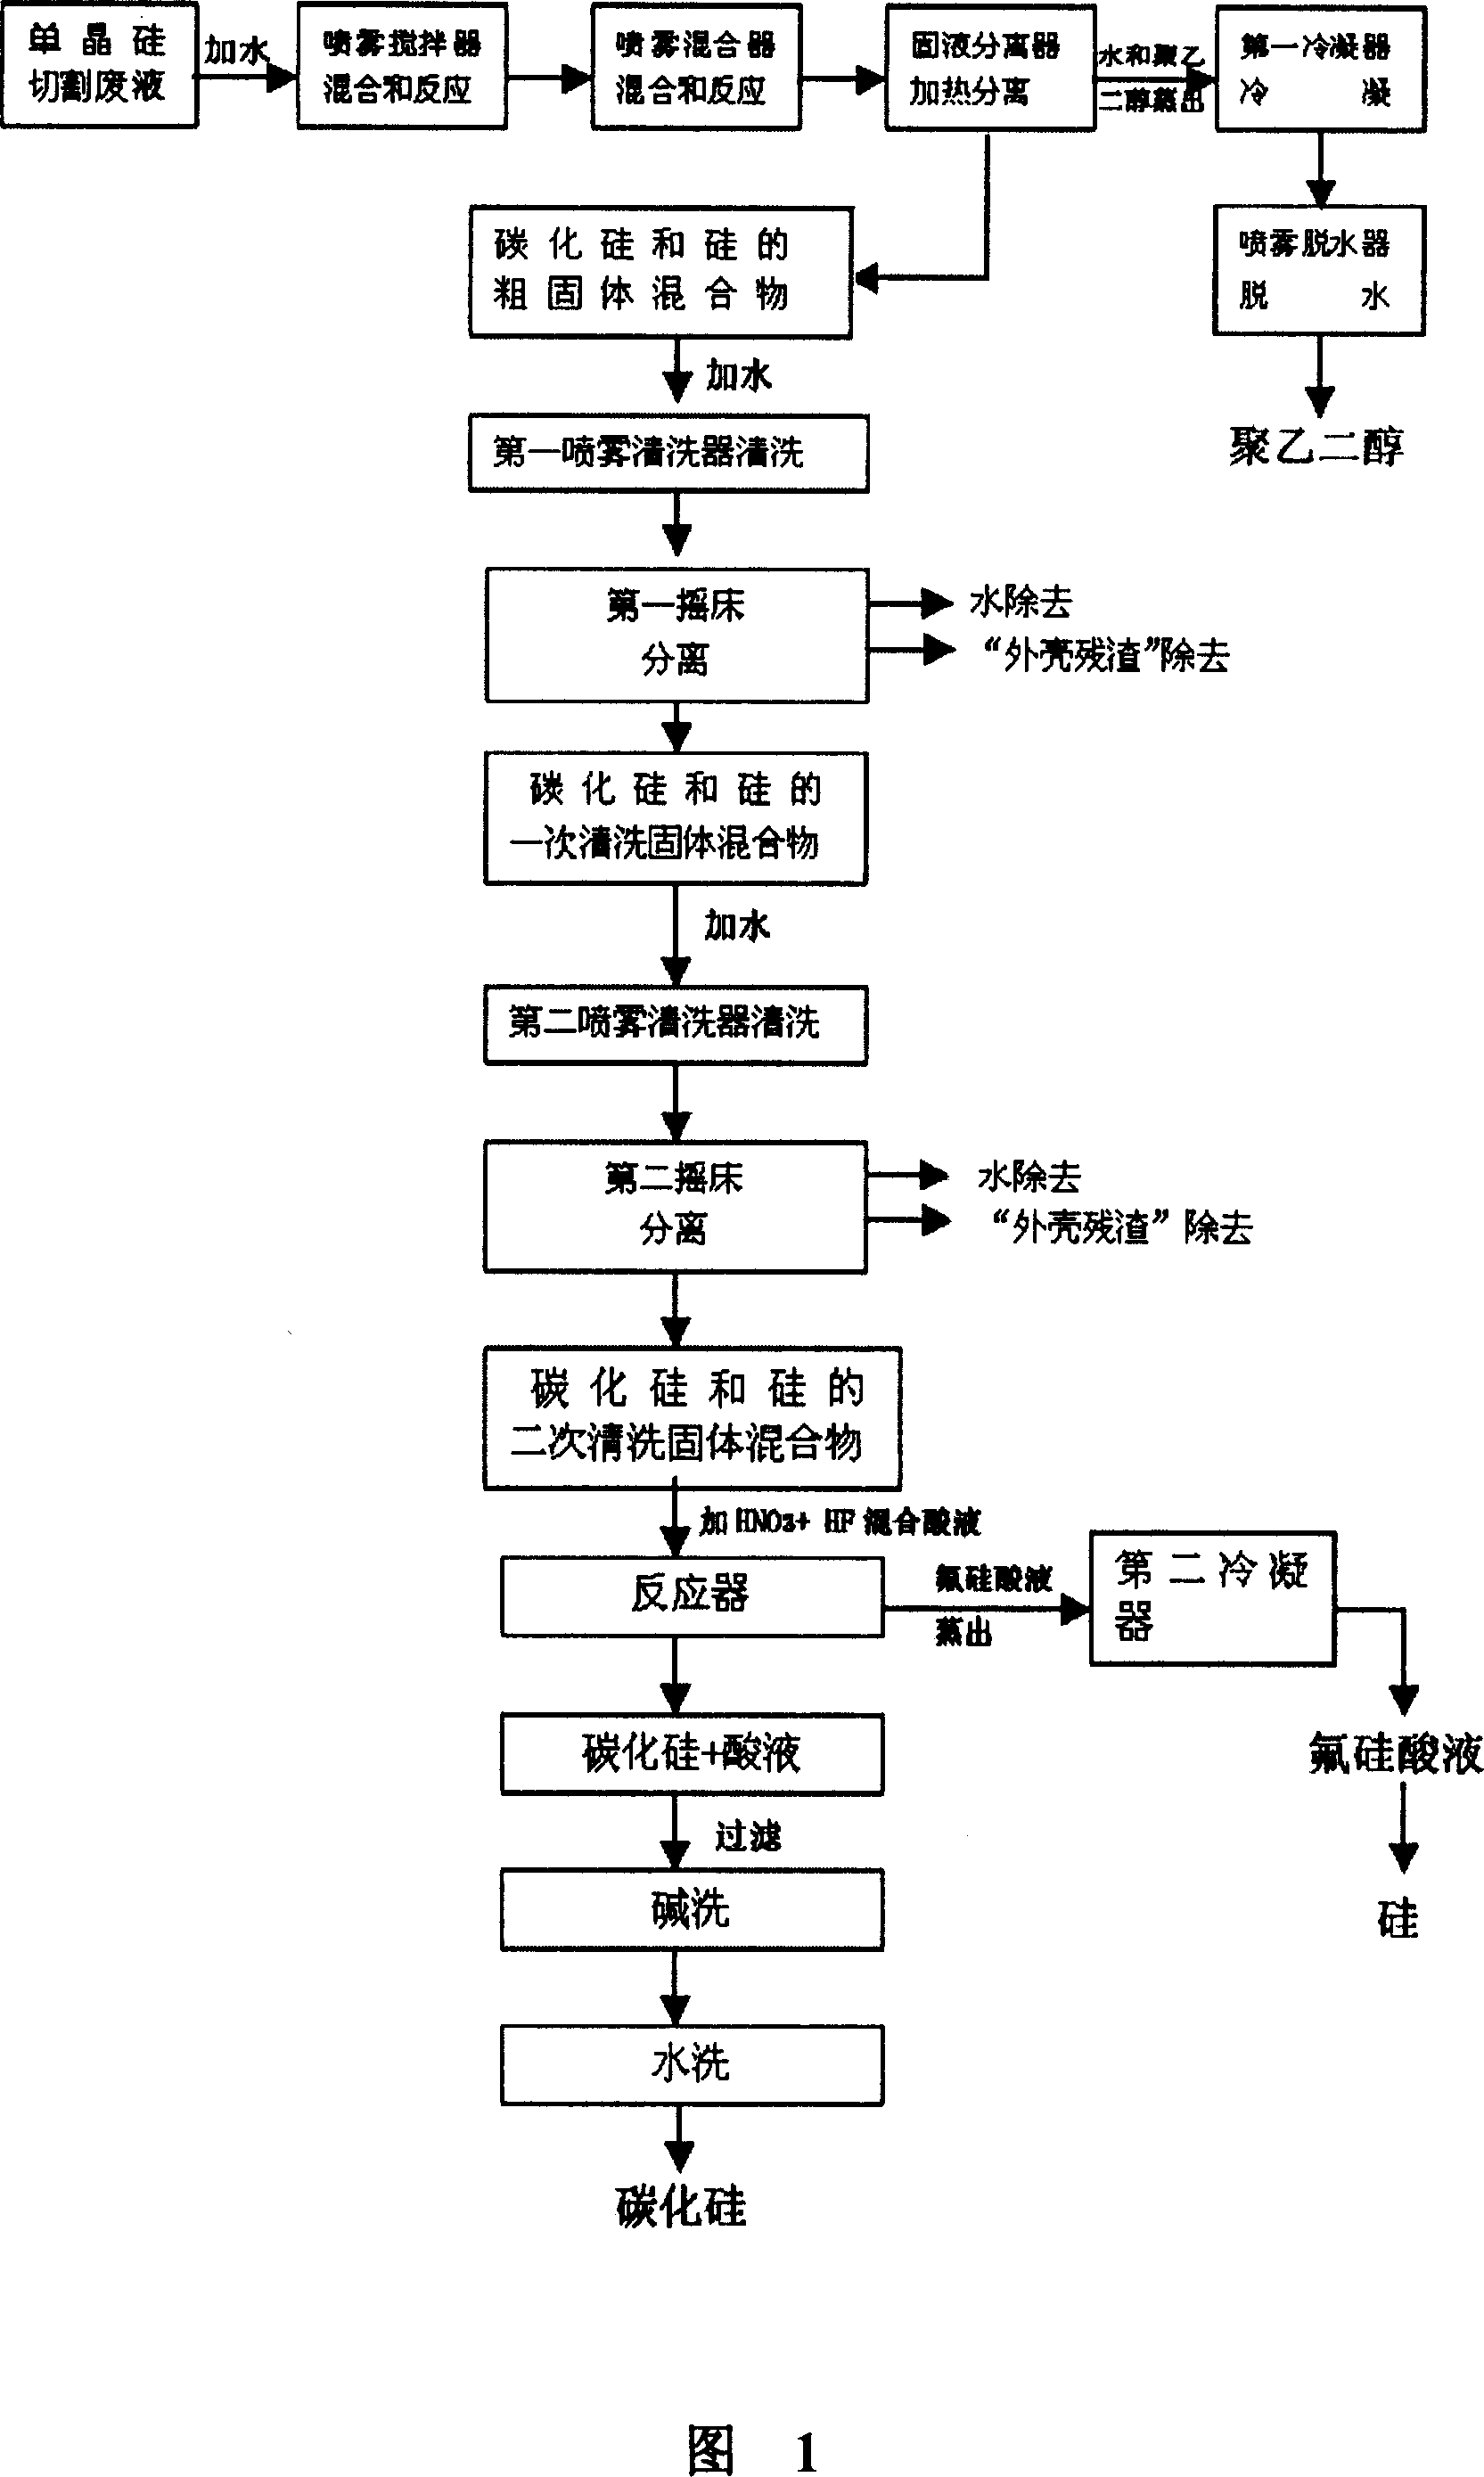 Treatment recovery method for monocrystalline silicon cutting waste liquor